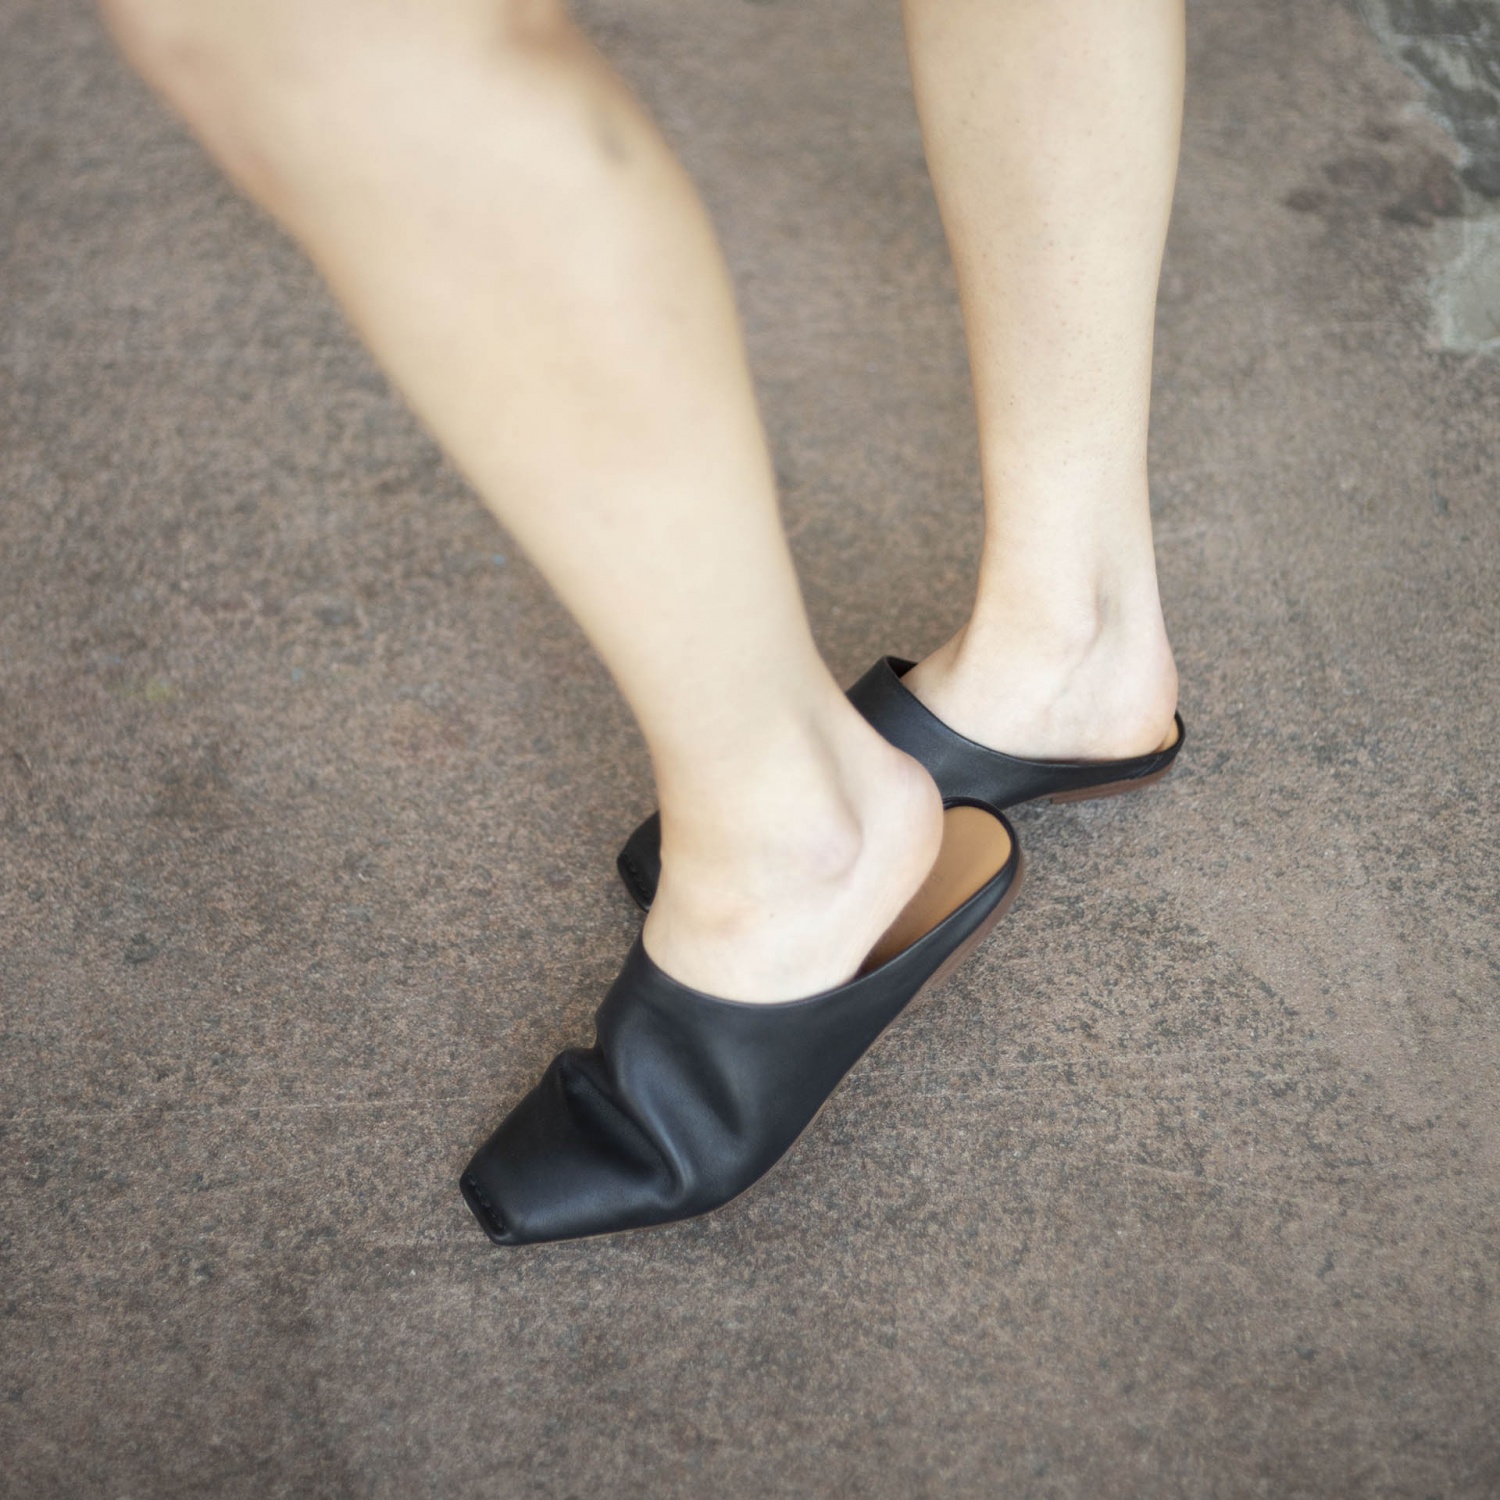 Try wearing slides of any shoe color o make your black outfit more classy